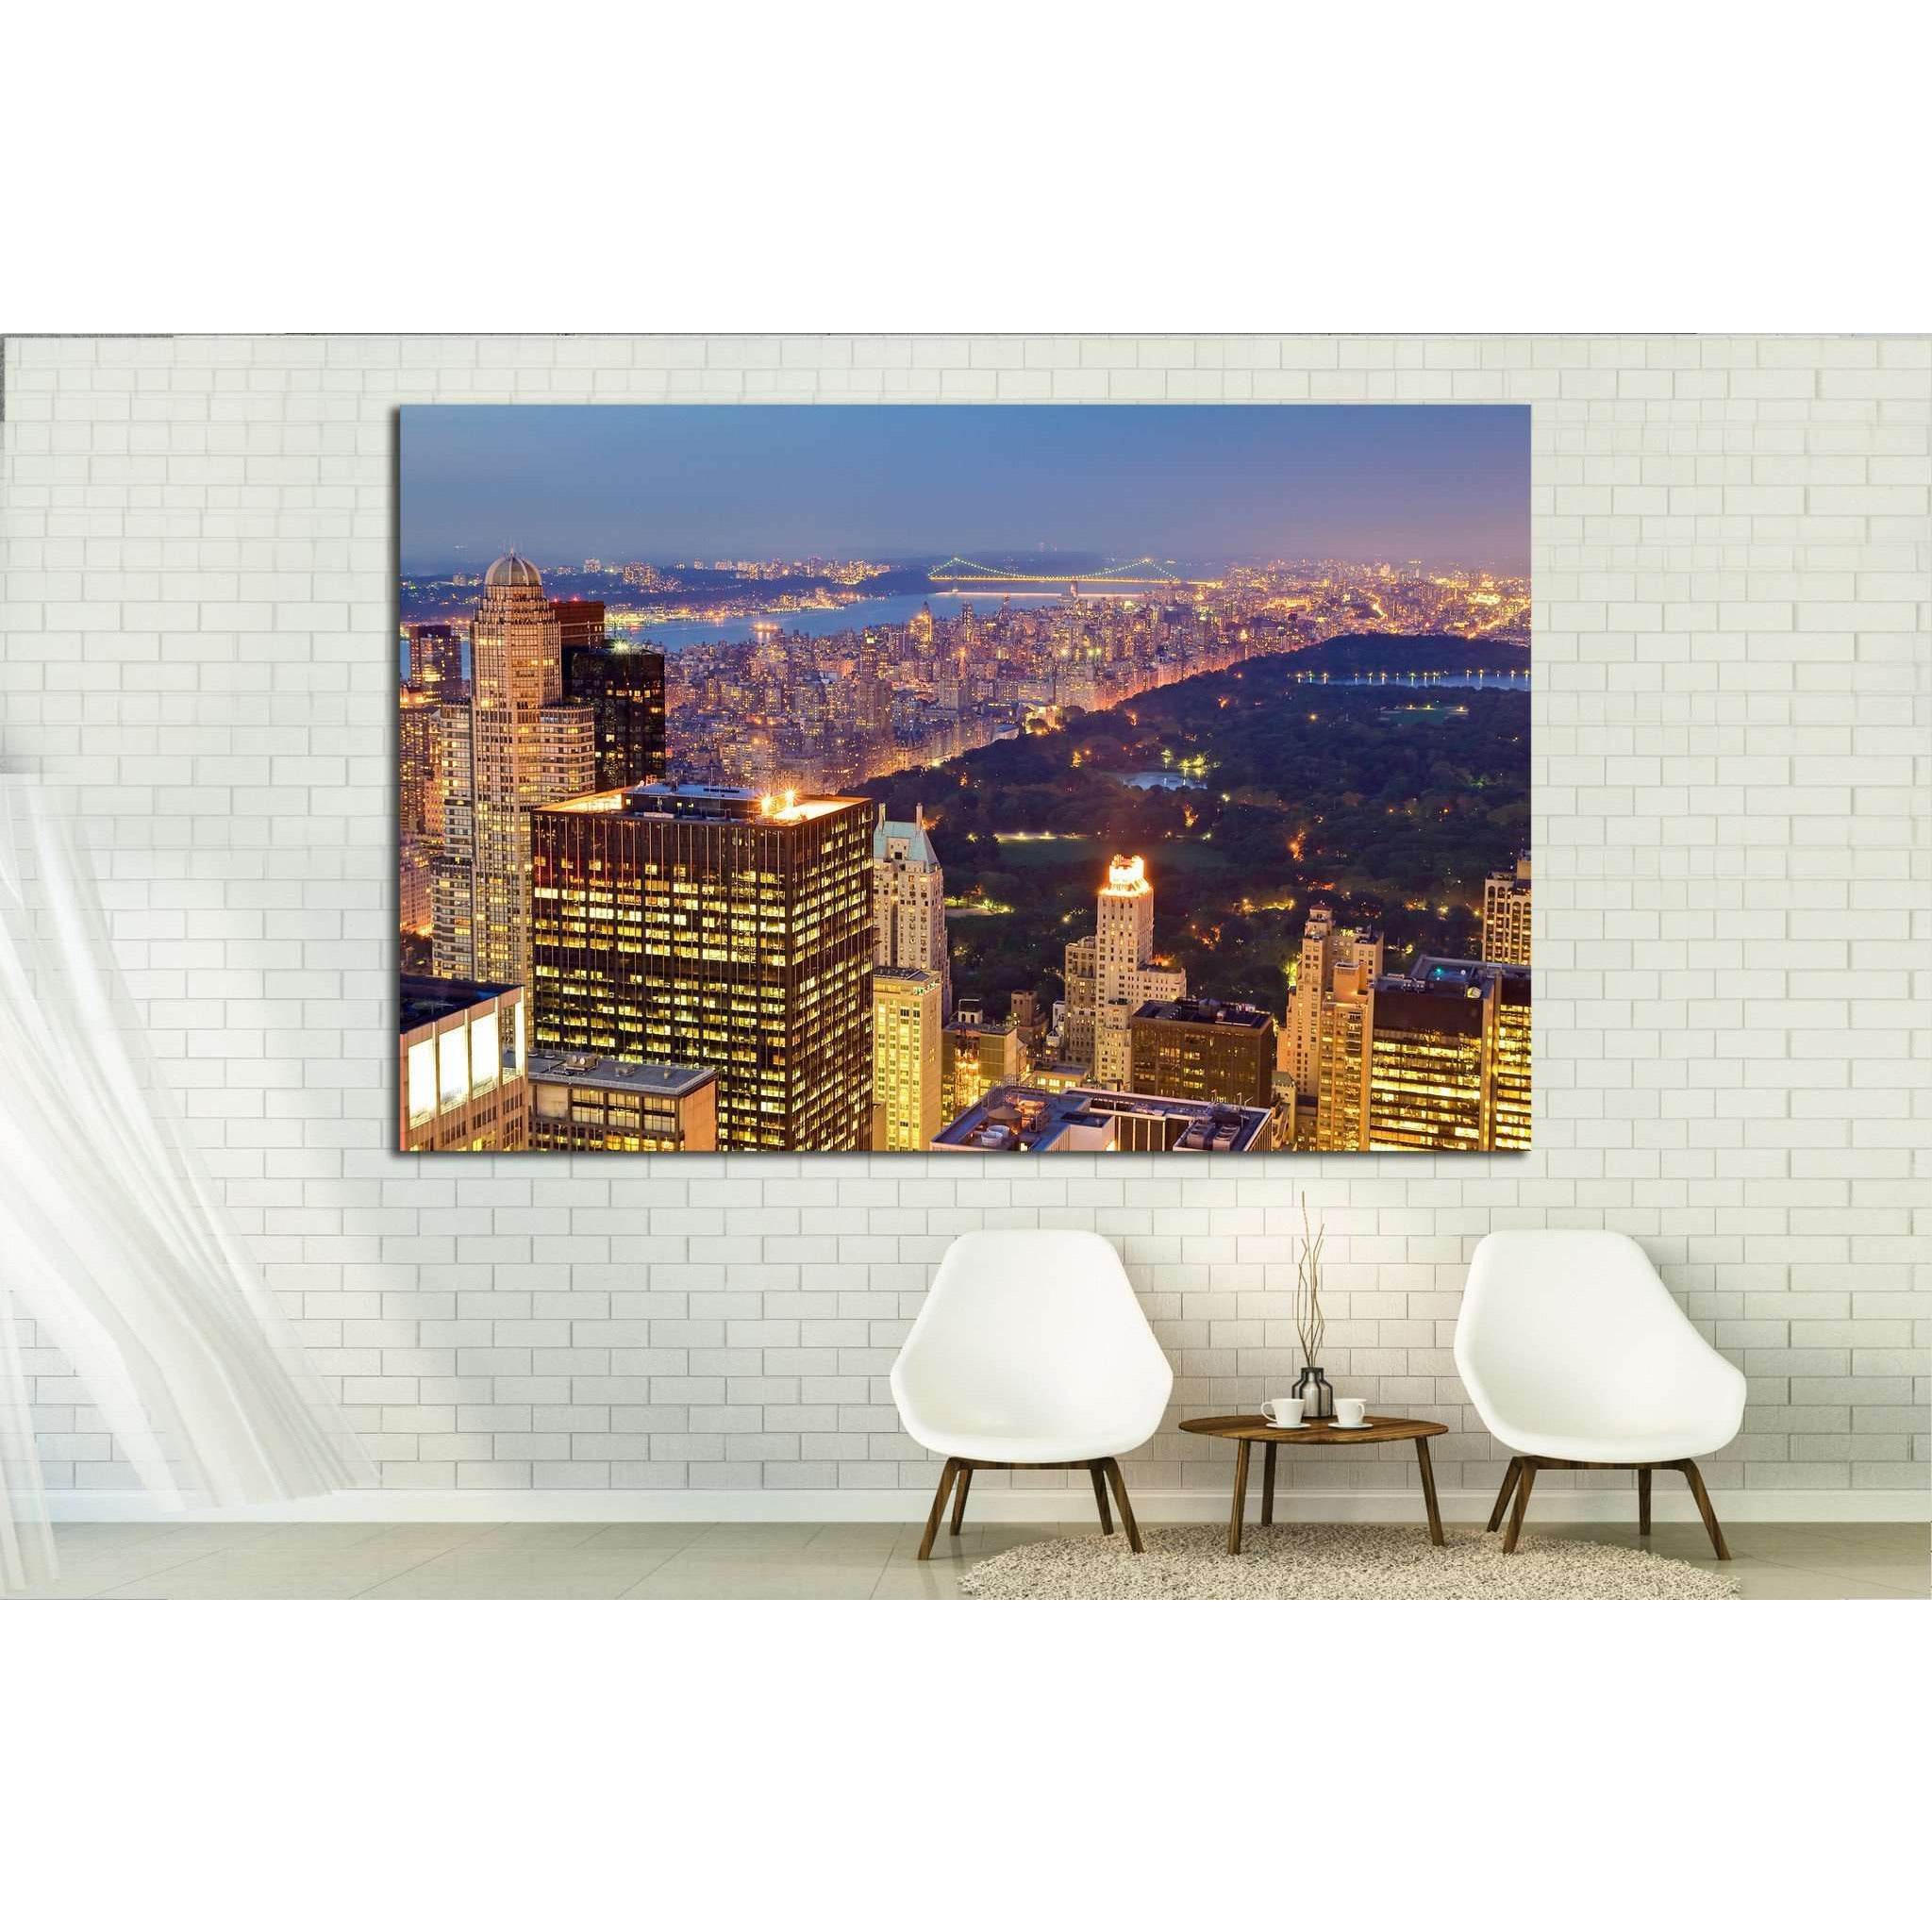 Central Park at Night in New York city, USA №1505 Ready to Hang Canvas Print